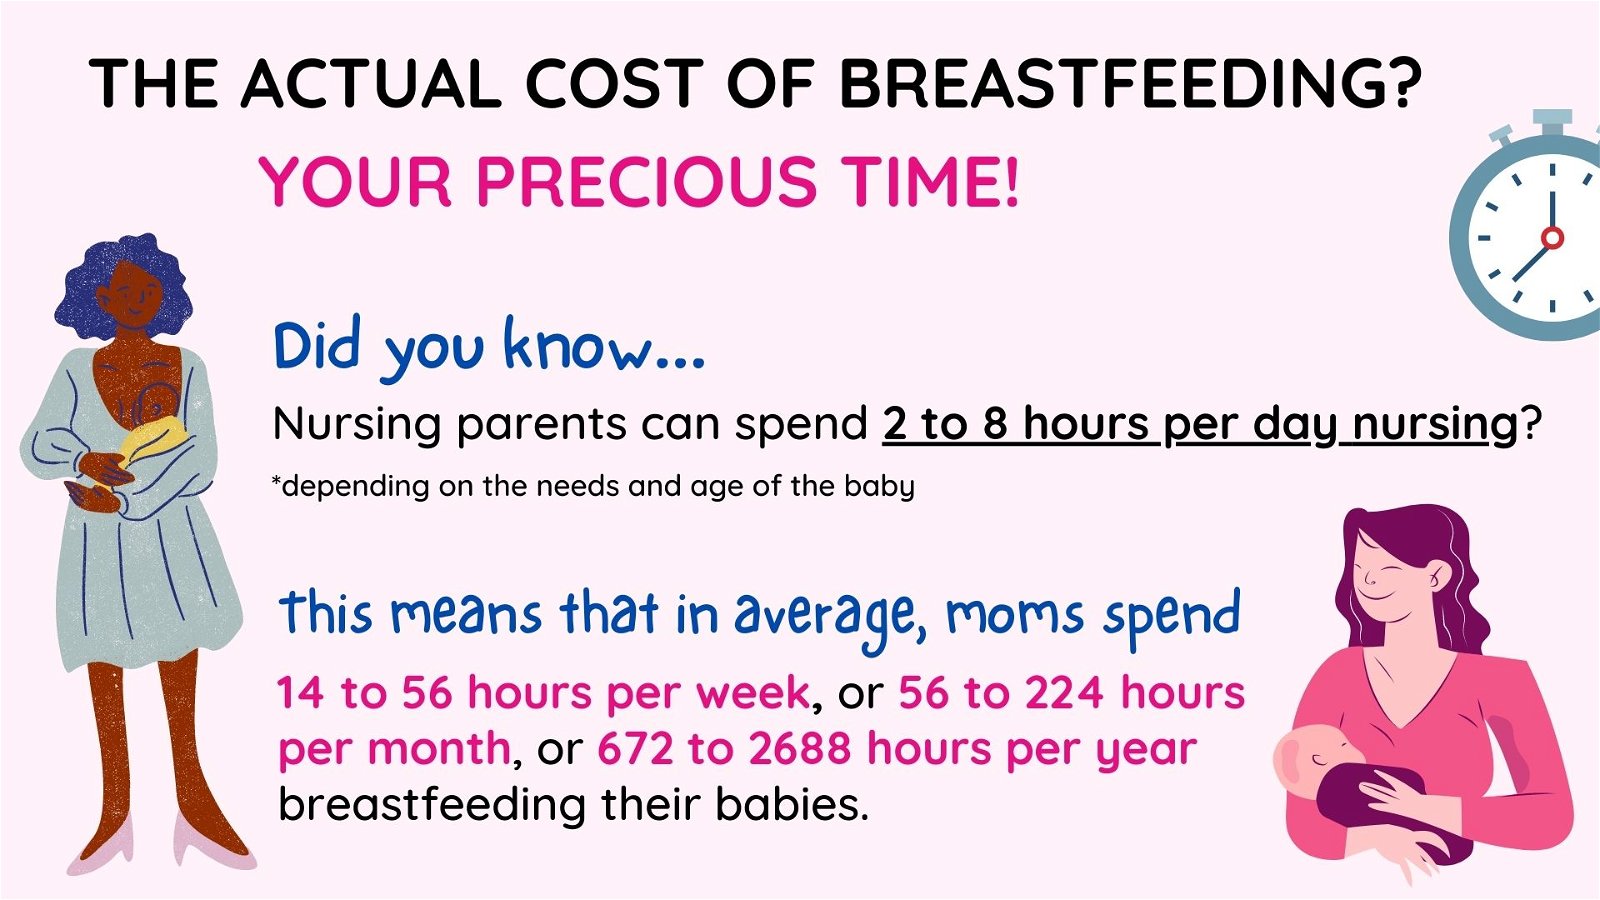 The Actual Cost of Breastfeeding